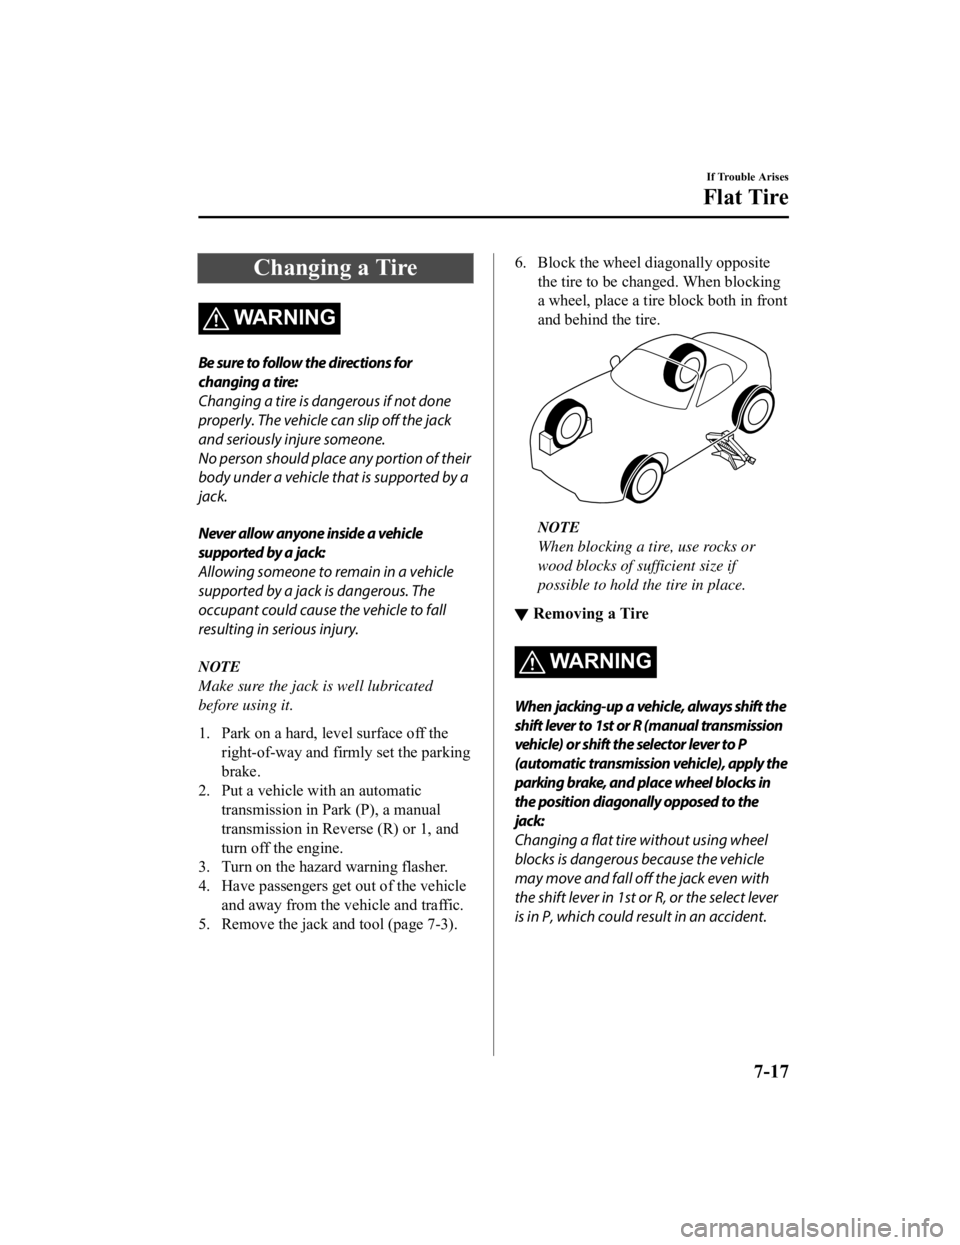 MAZDA MODEL MX-5 MIATA 2021  Owners Manual Changing a Tire
WARNING
Be sure to follow the directions for
changing a tire:
Changing a tire is dangerous if not done
properly. The vehicle can slip off the jack
and seriously injure someone.
No pers